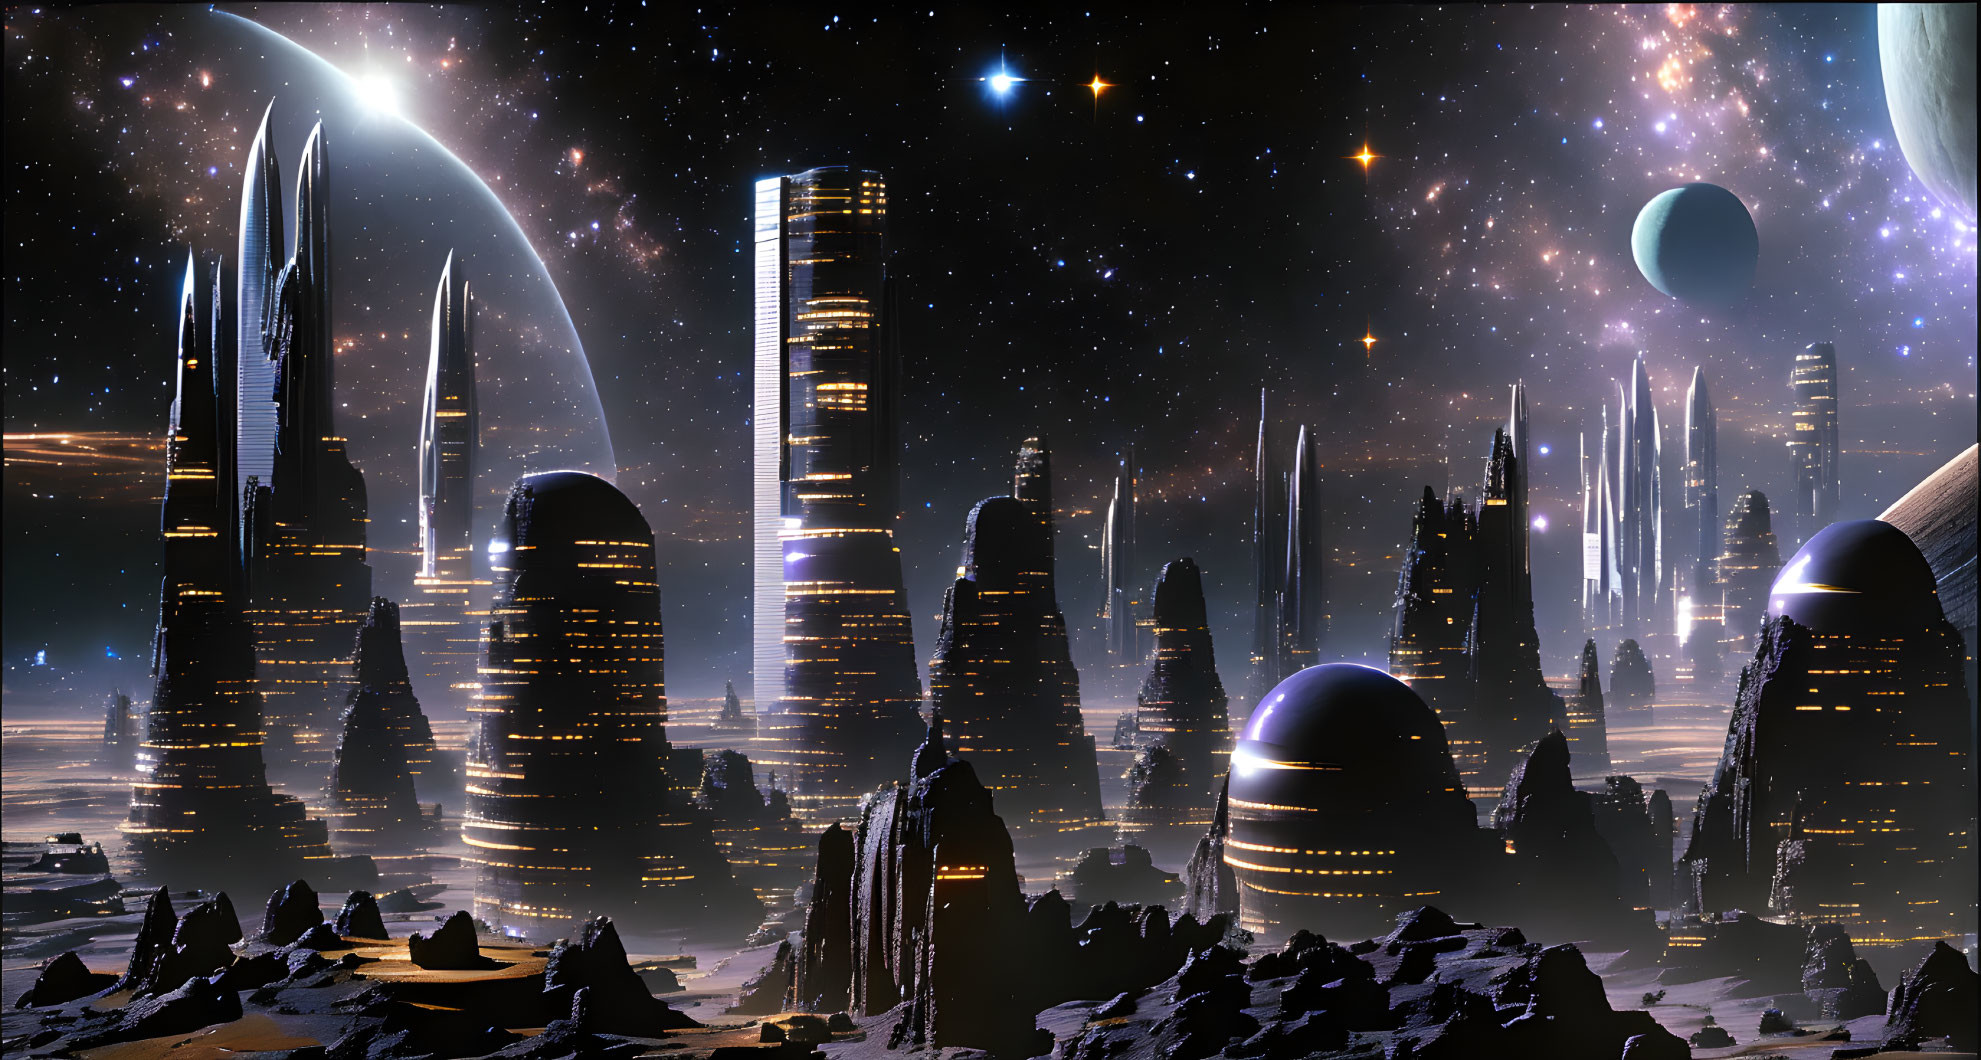 Futuristic cityscape with towering skyscrapers and cosmic backdrop